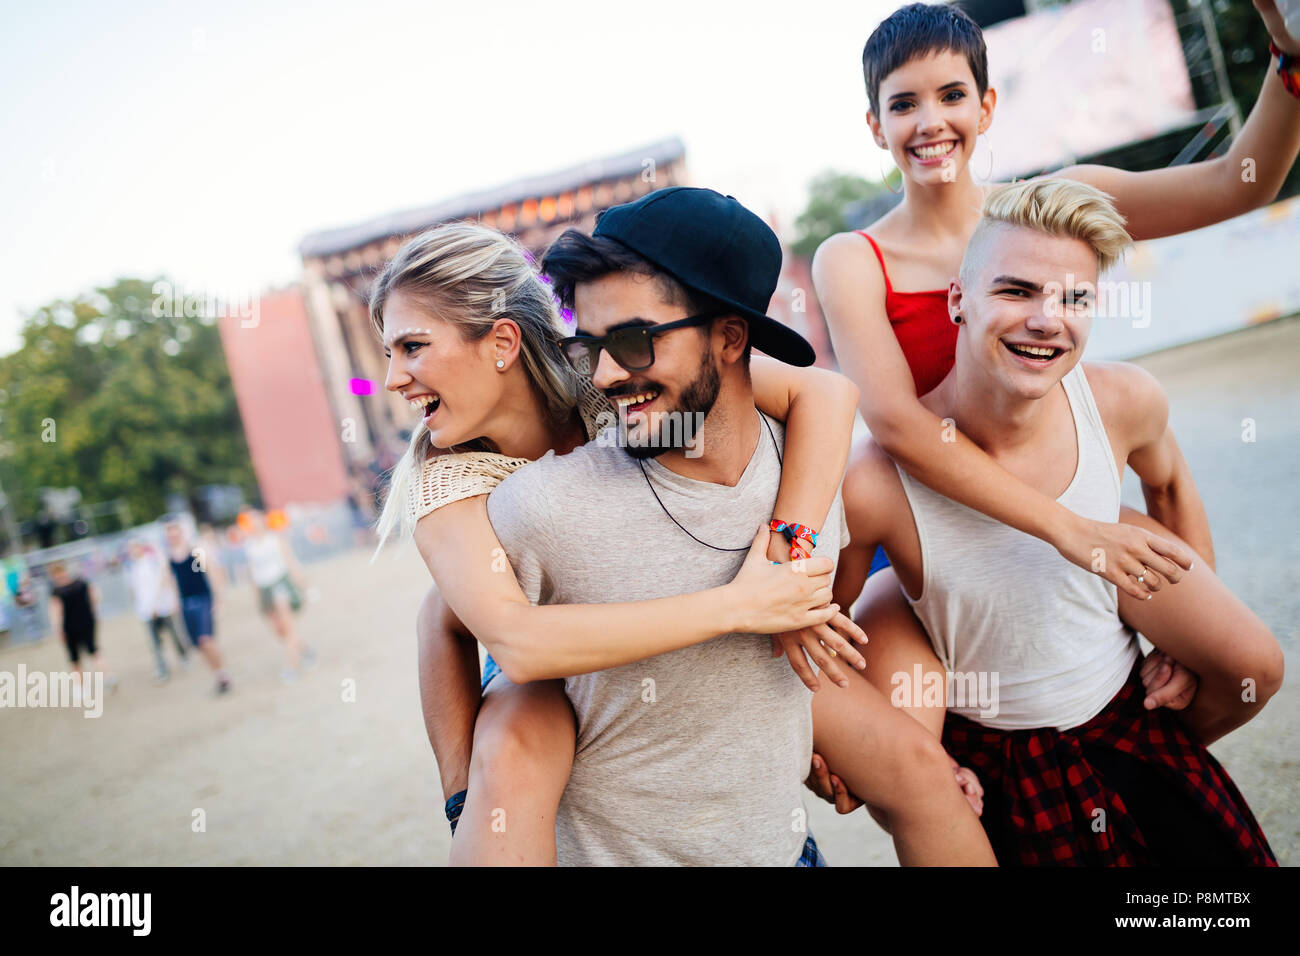 Group of friends having fun time at music festival Stock Photo